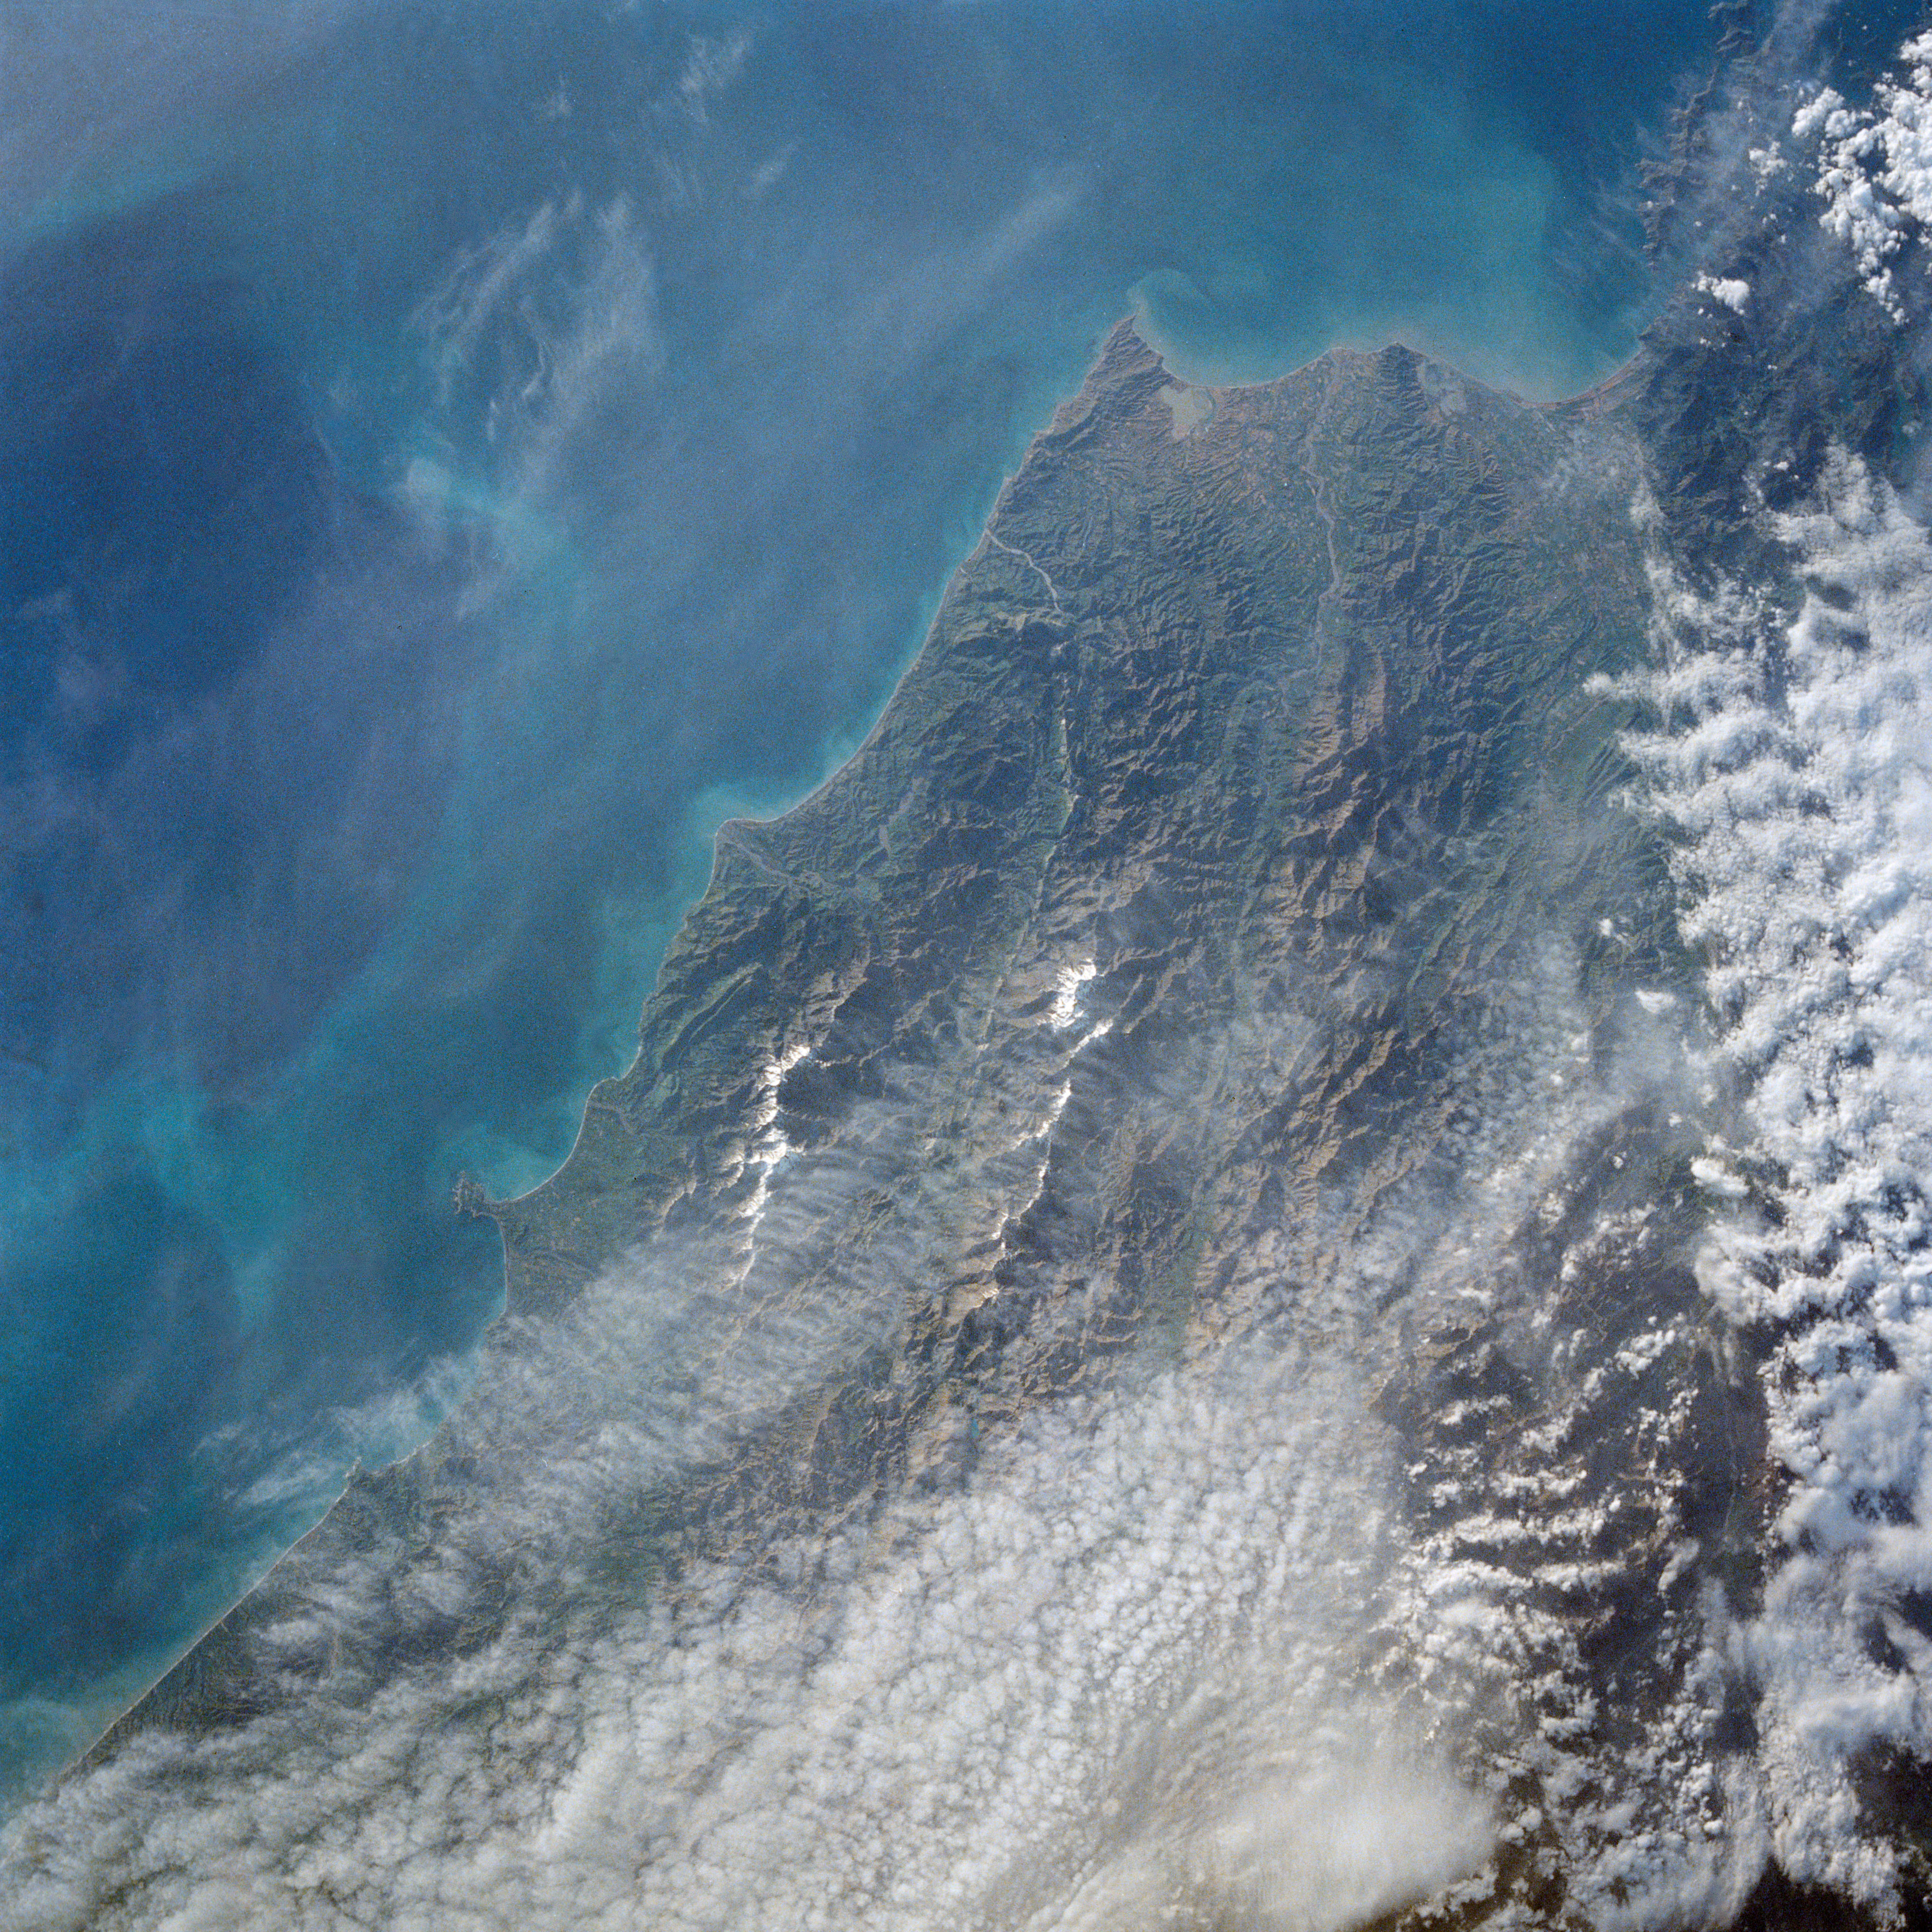 STS-9 crew Earth observation photograph of Cape Campbell, New Zealand